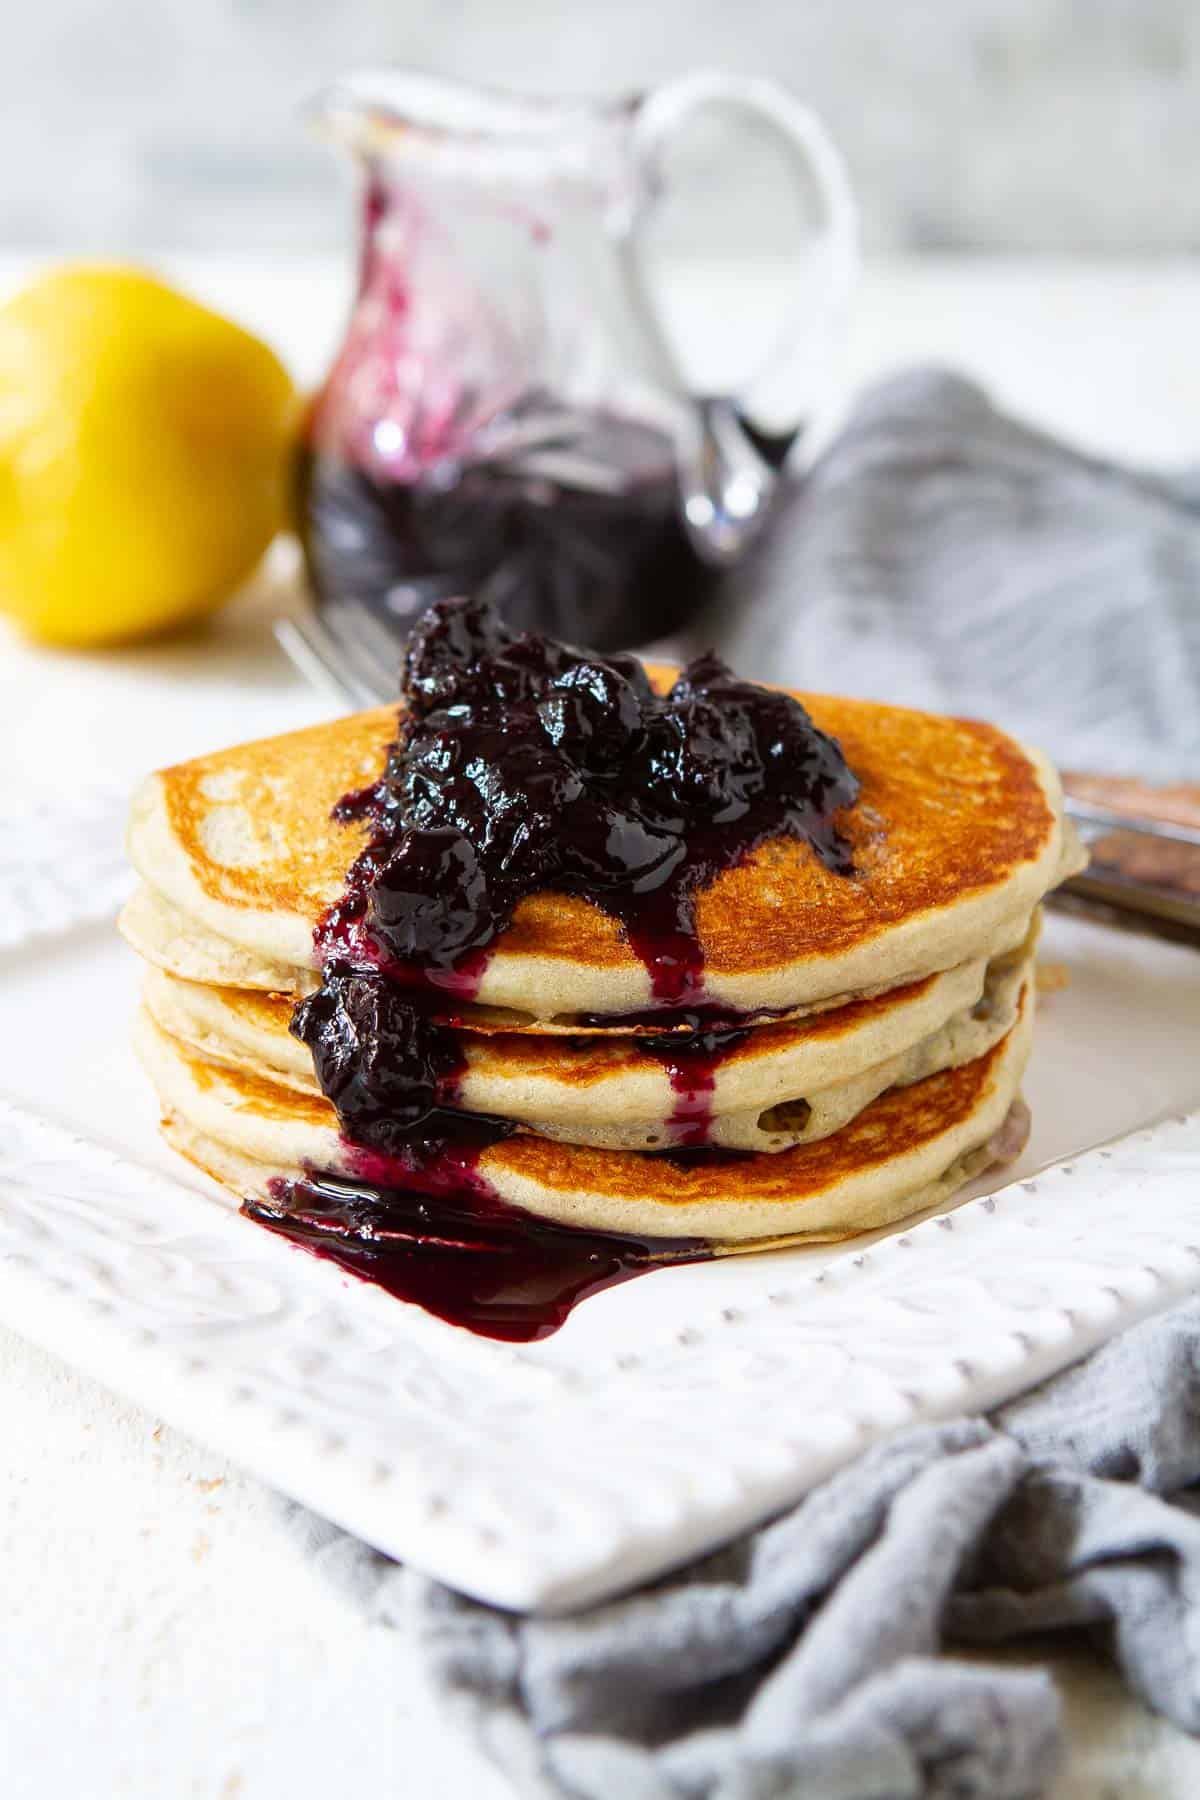 Brunch just got even better! These amazing lemon blueberry pancakes are loaded with flavor. Your family will never know they're healthy. | Recipe | Easy | Healthy | Whole wheat